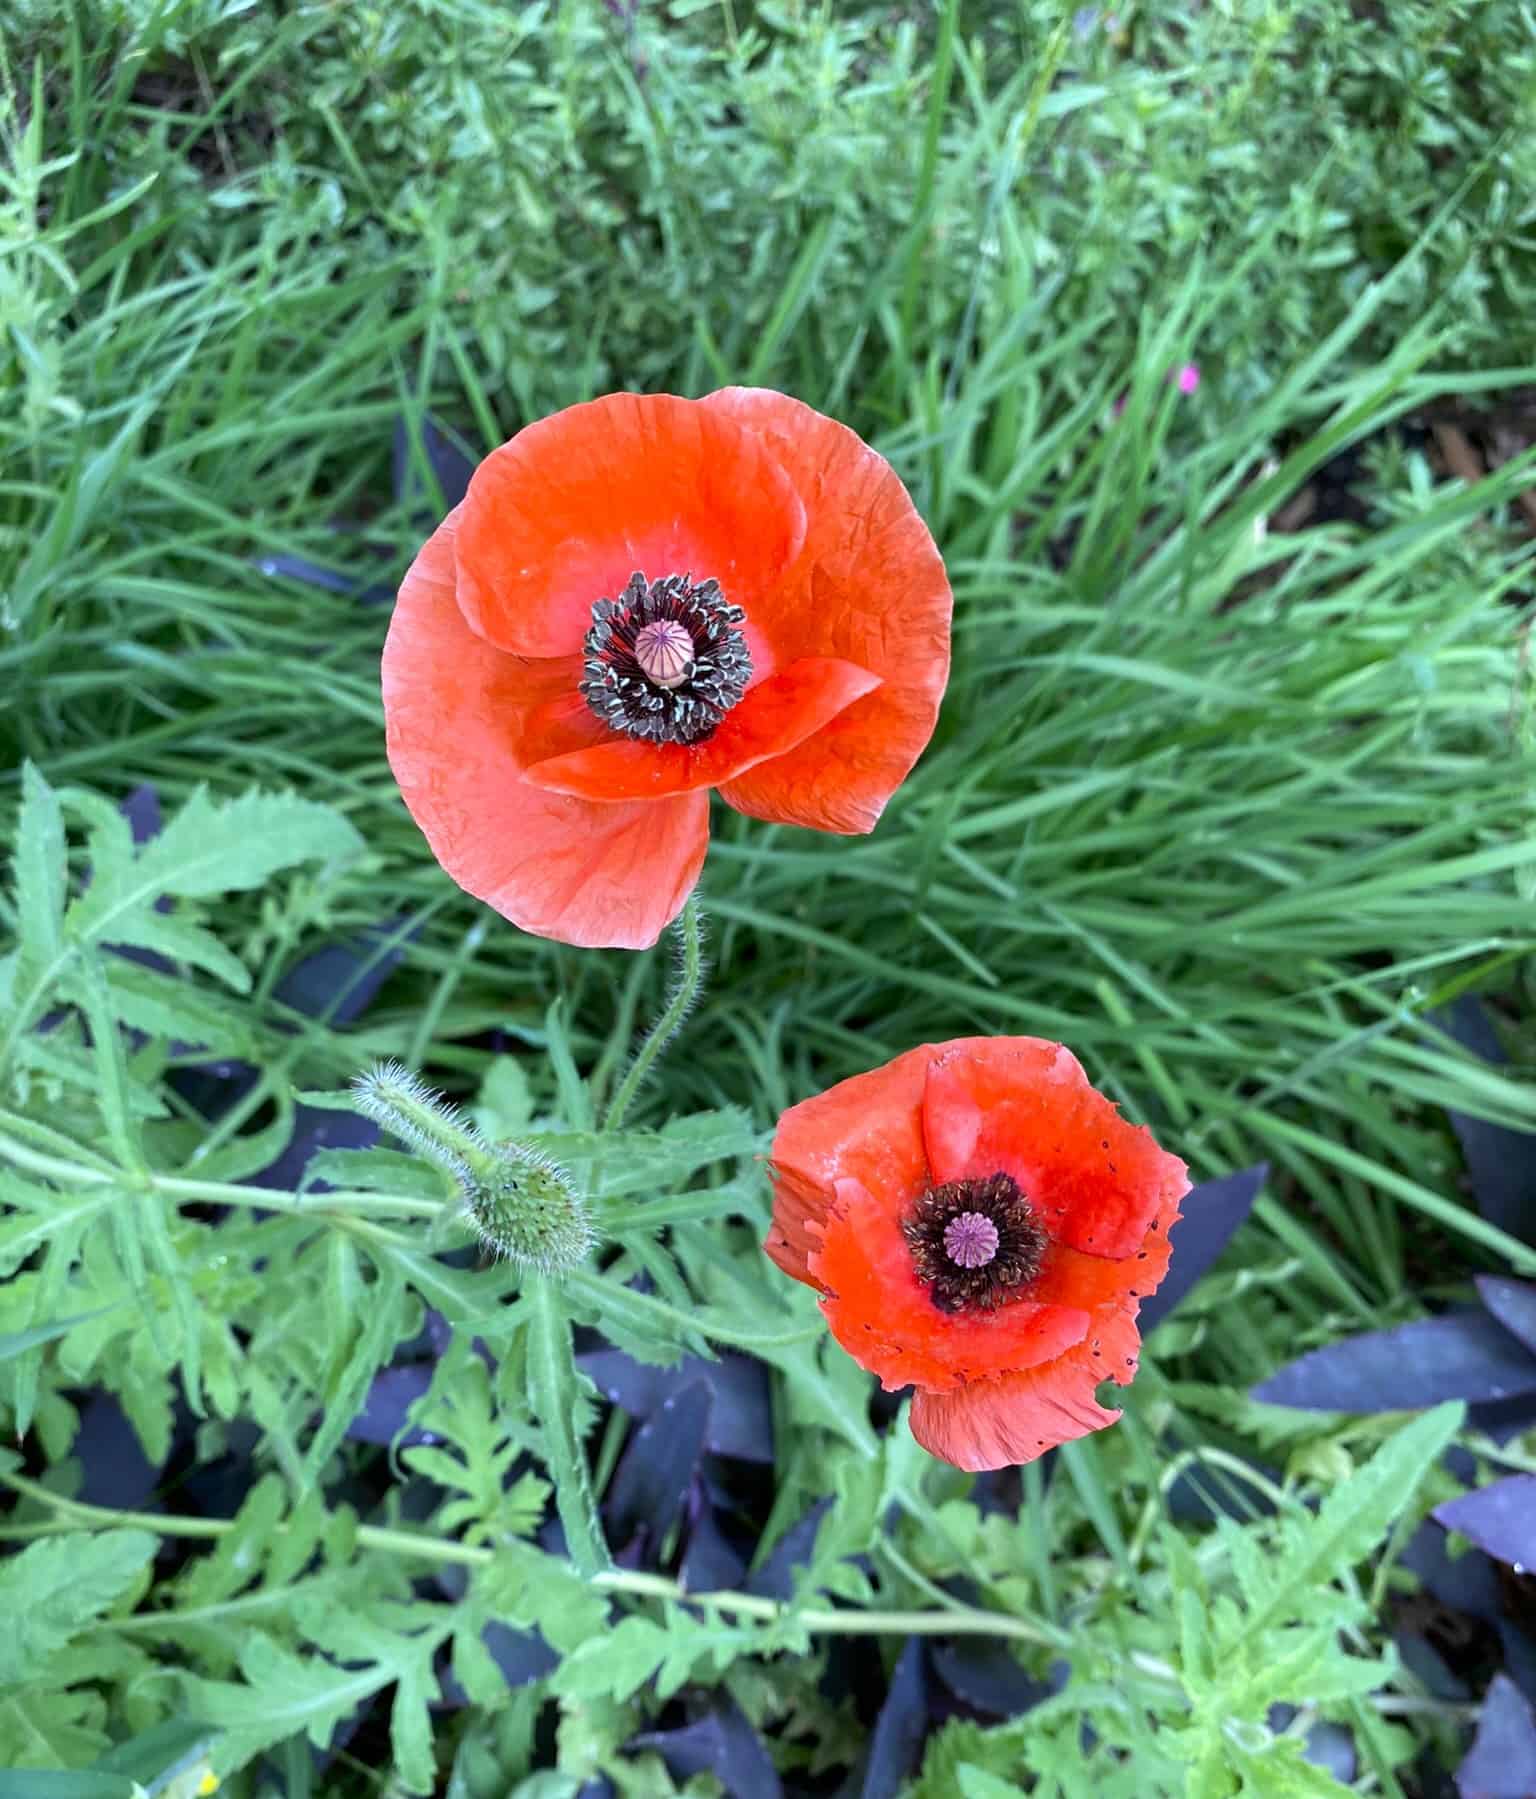 poppy flowers are stunning red against spring greens in the garden